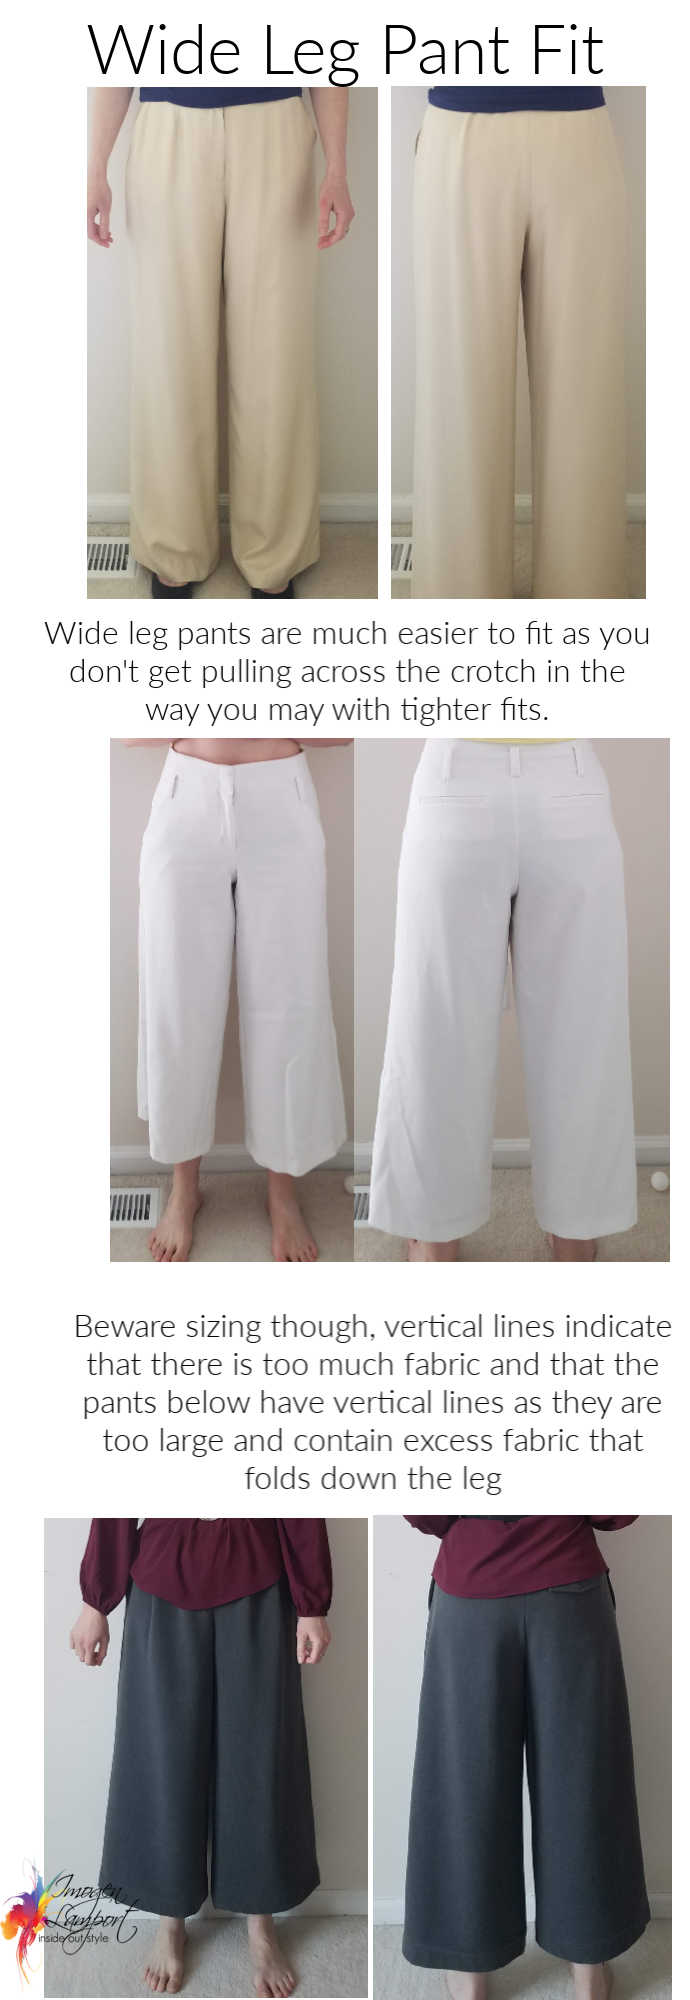 Can this be fixed? Camel toe pants but they fit perfectly